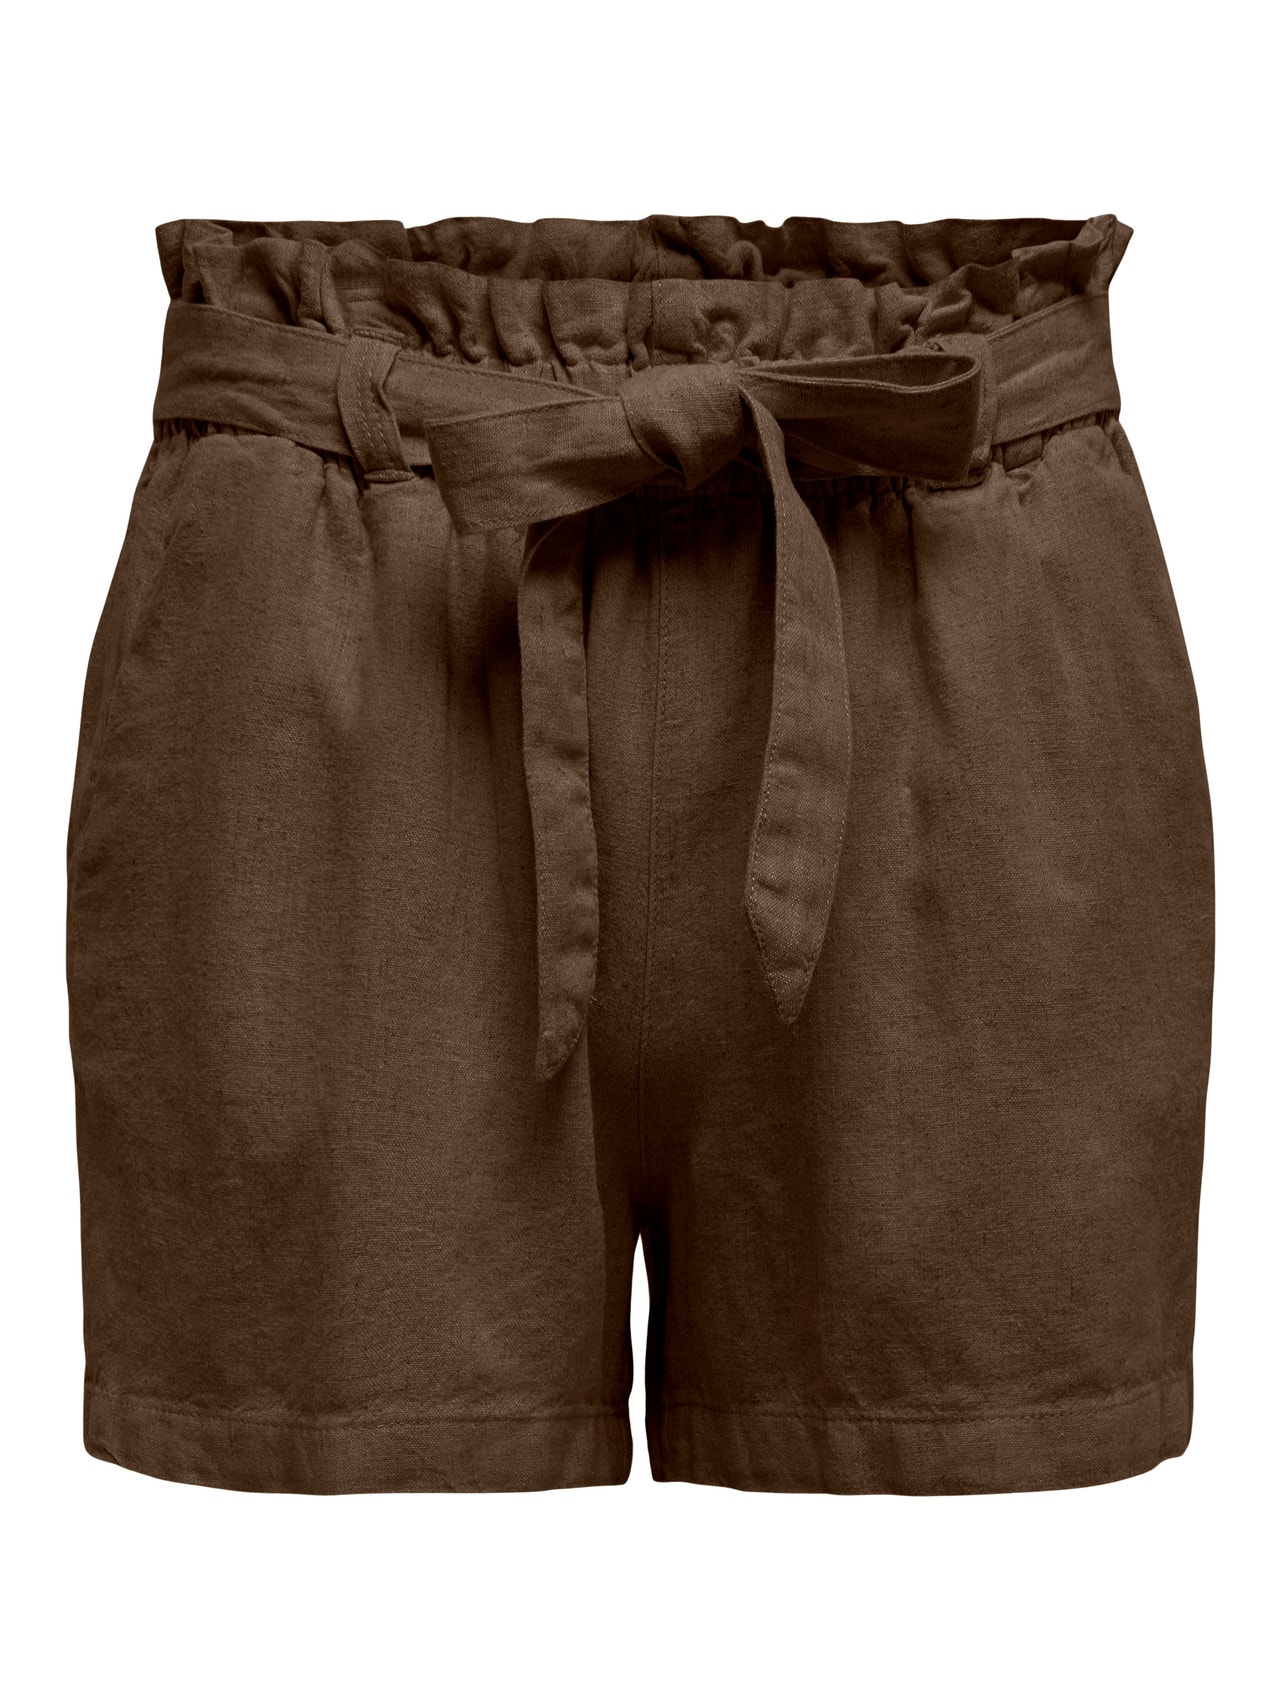 ONLY Linen shorts with tie belt  -Carafe - 15225921